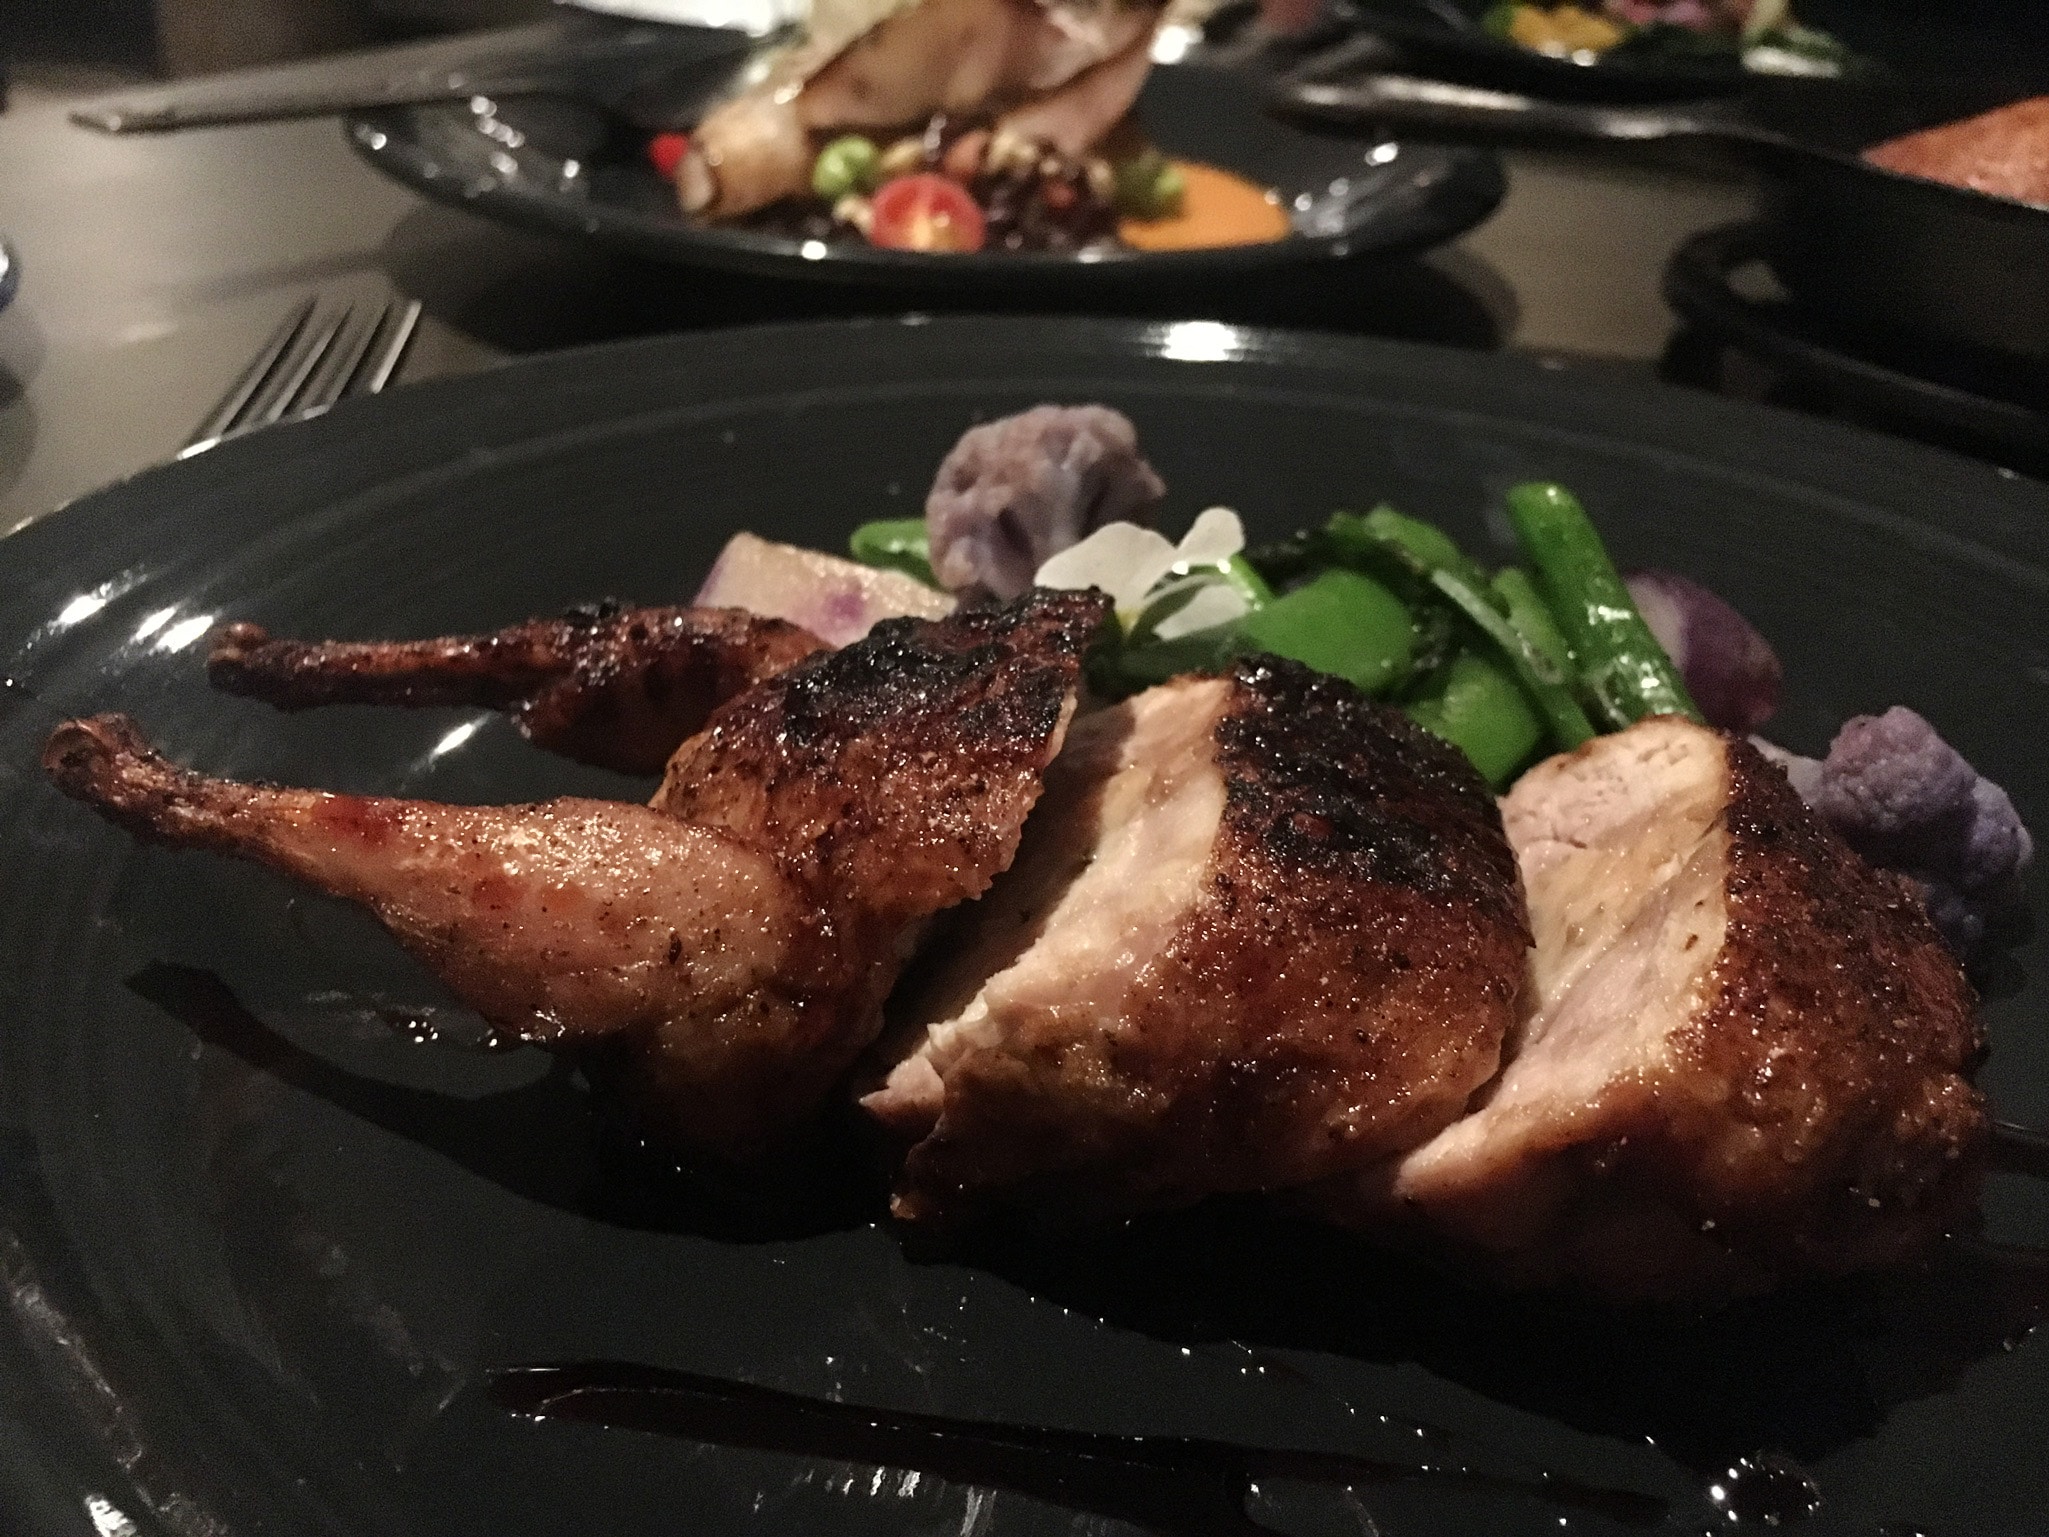 Stuffed quail from Bear and Star in Los Olivos